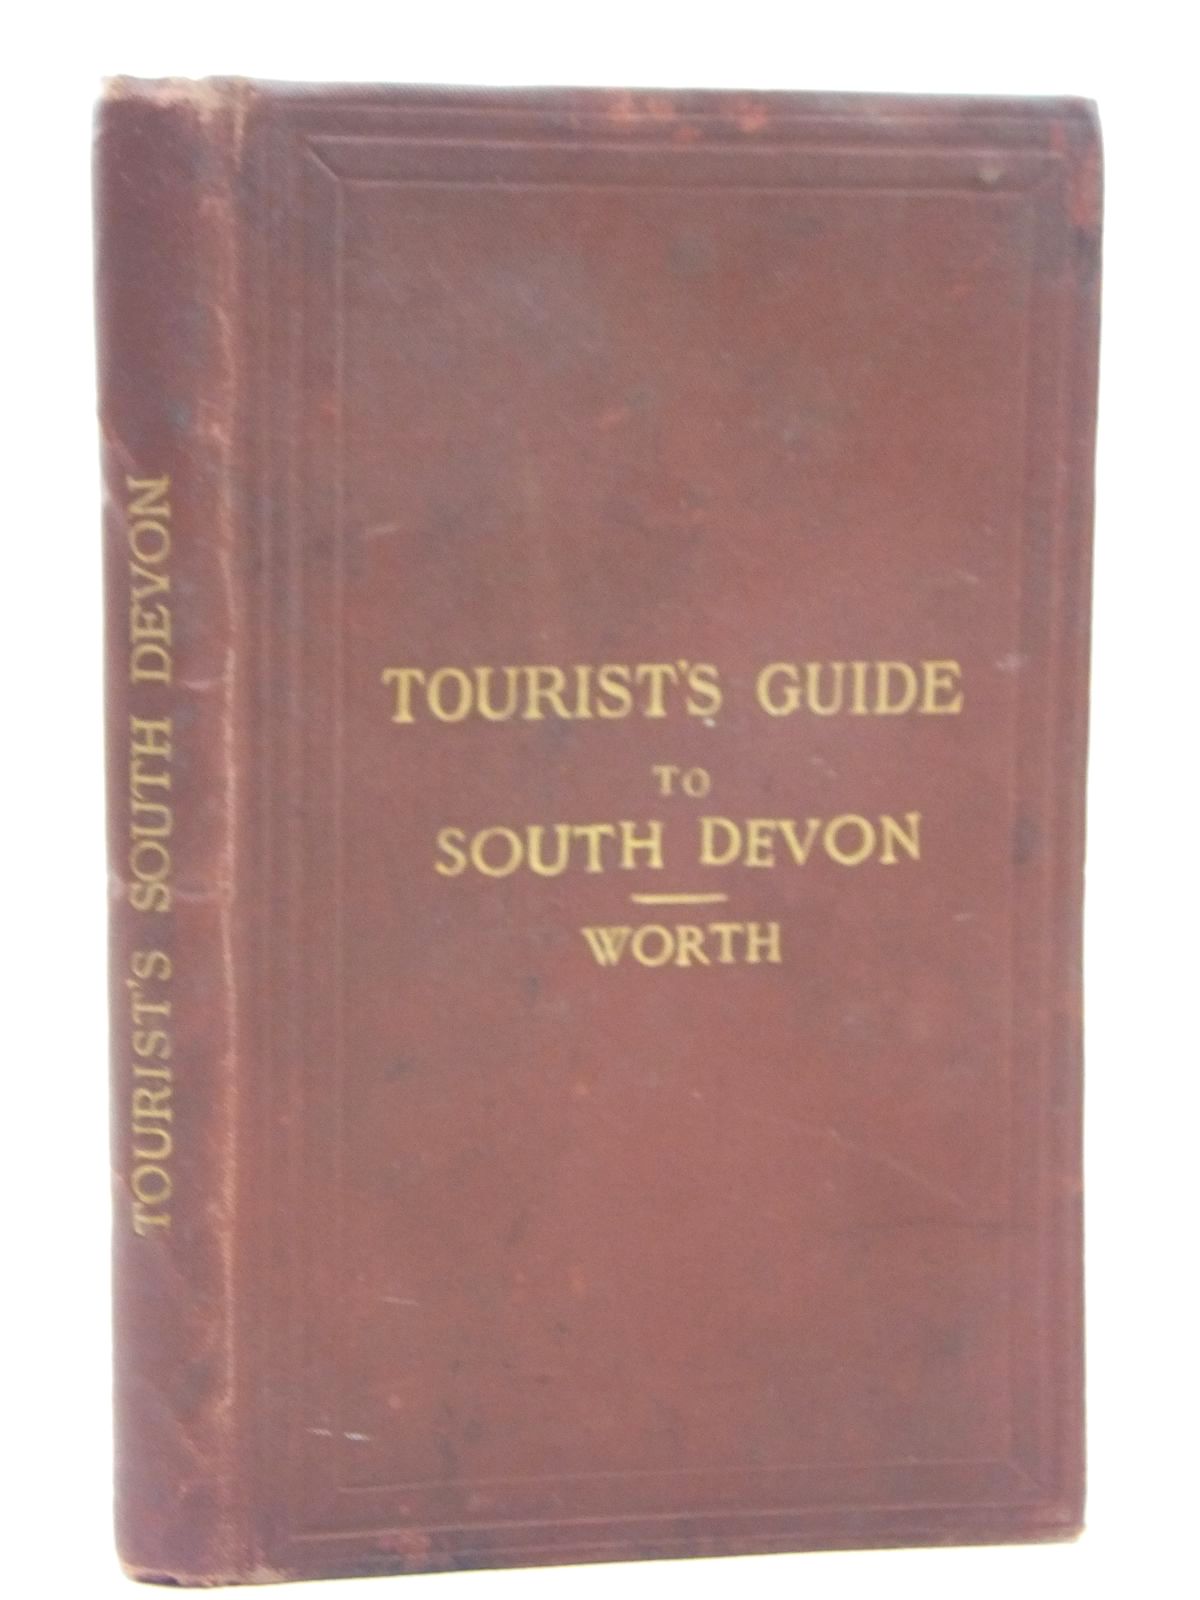 Photo of TOURIST'S GUIDE TO SOUTH DEVON- Stock Number: 1609468